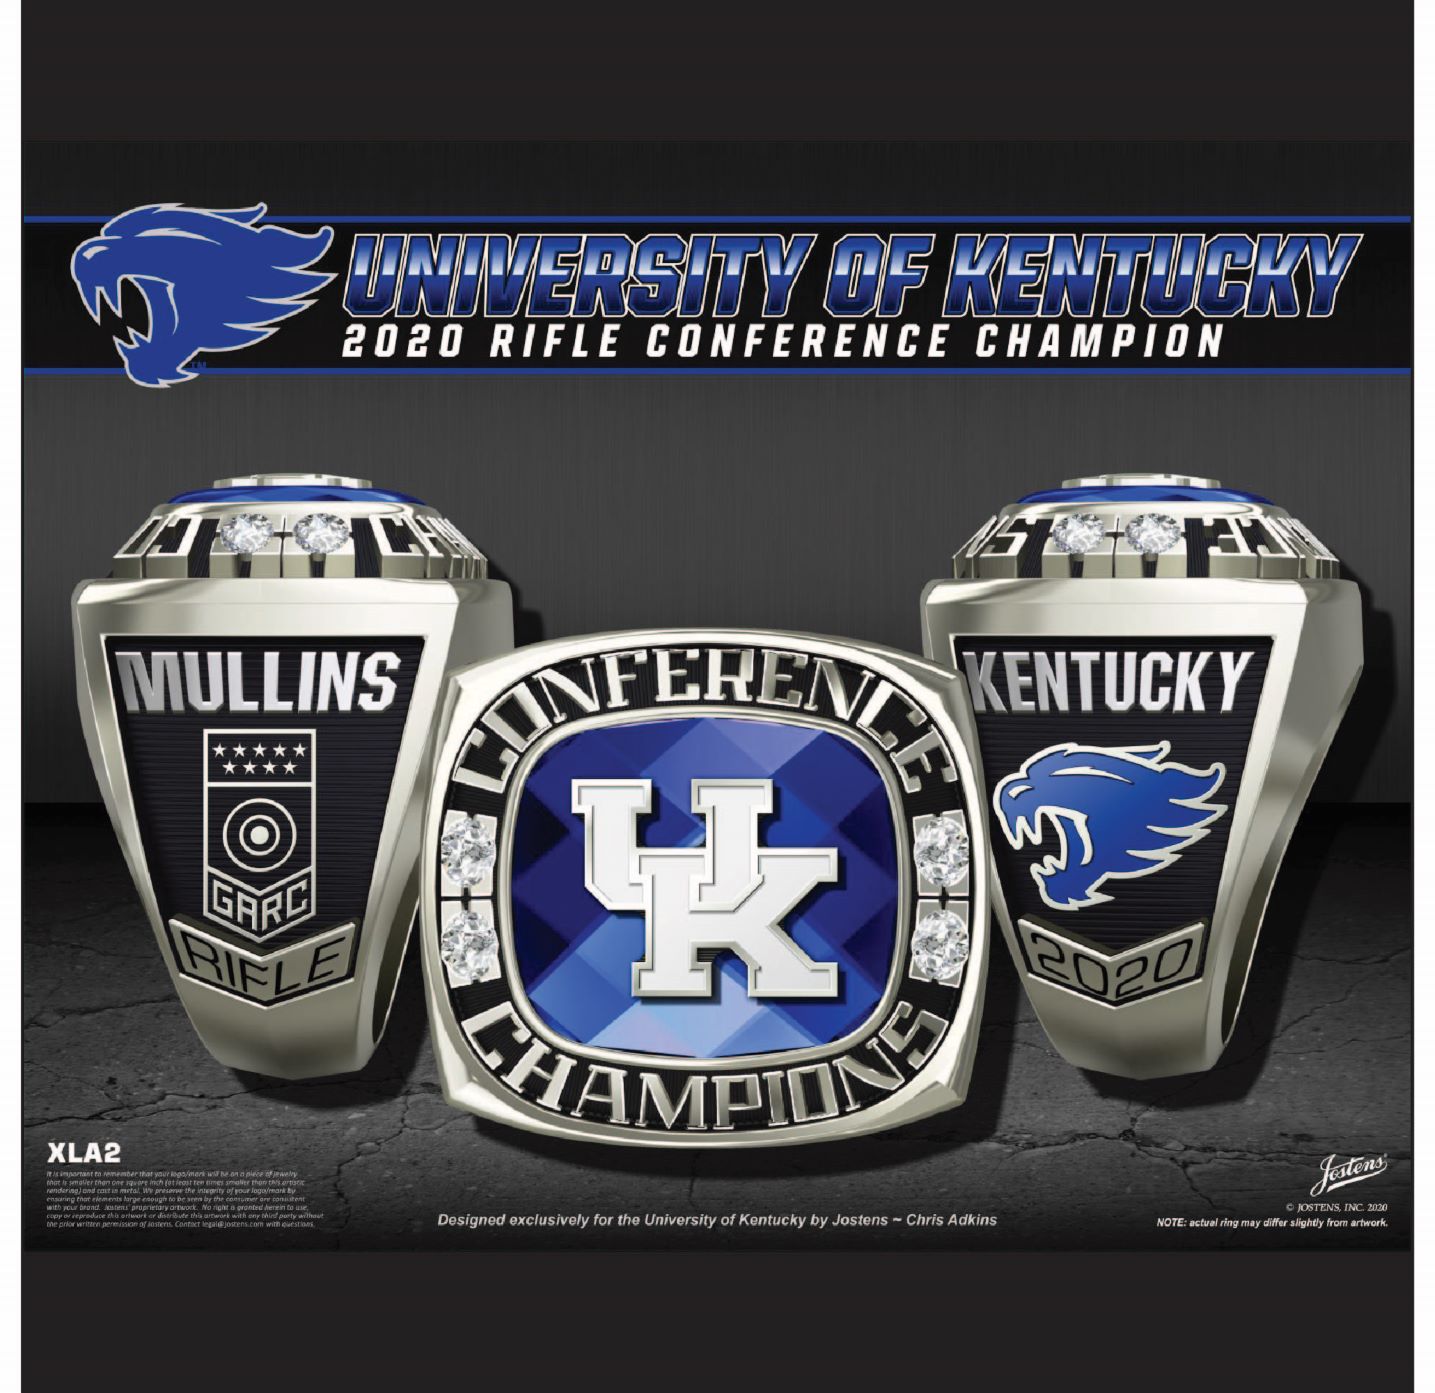 University of Kentucky Coed Rifle 2020 Conference Championship Ring